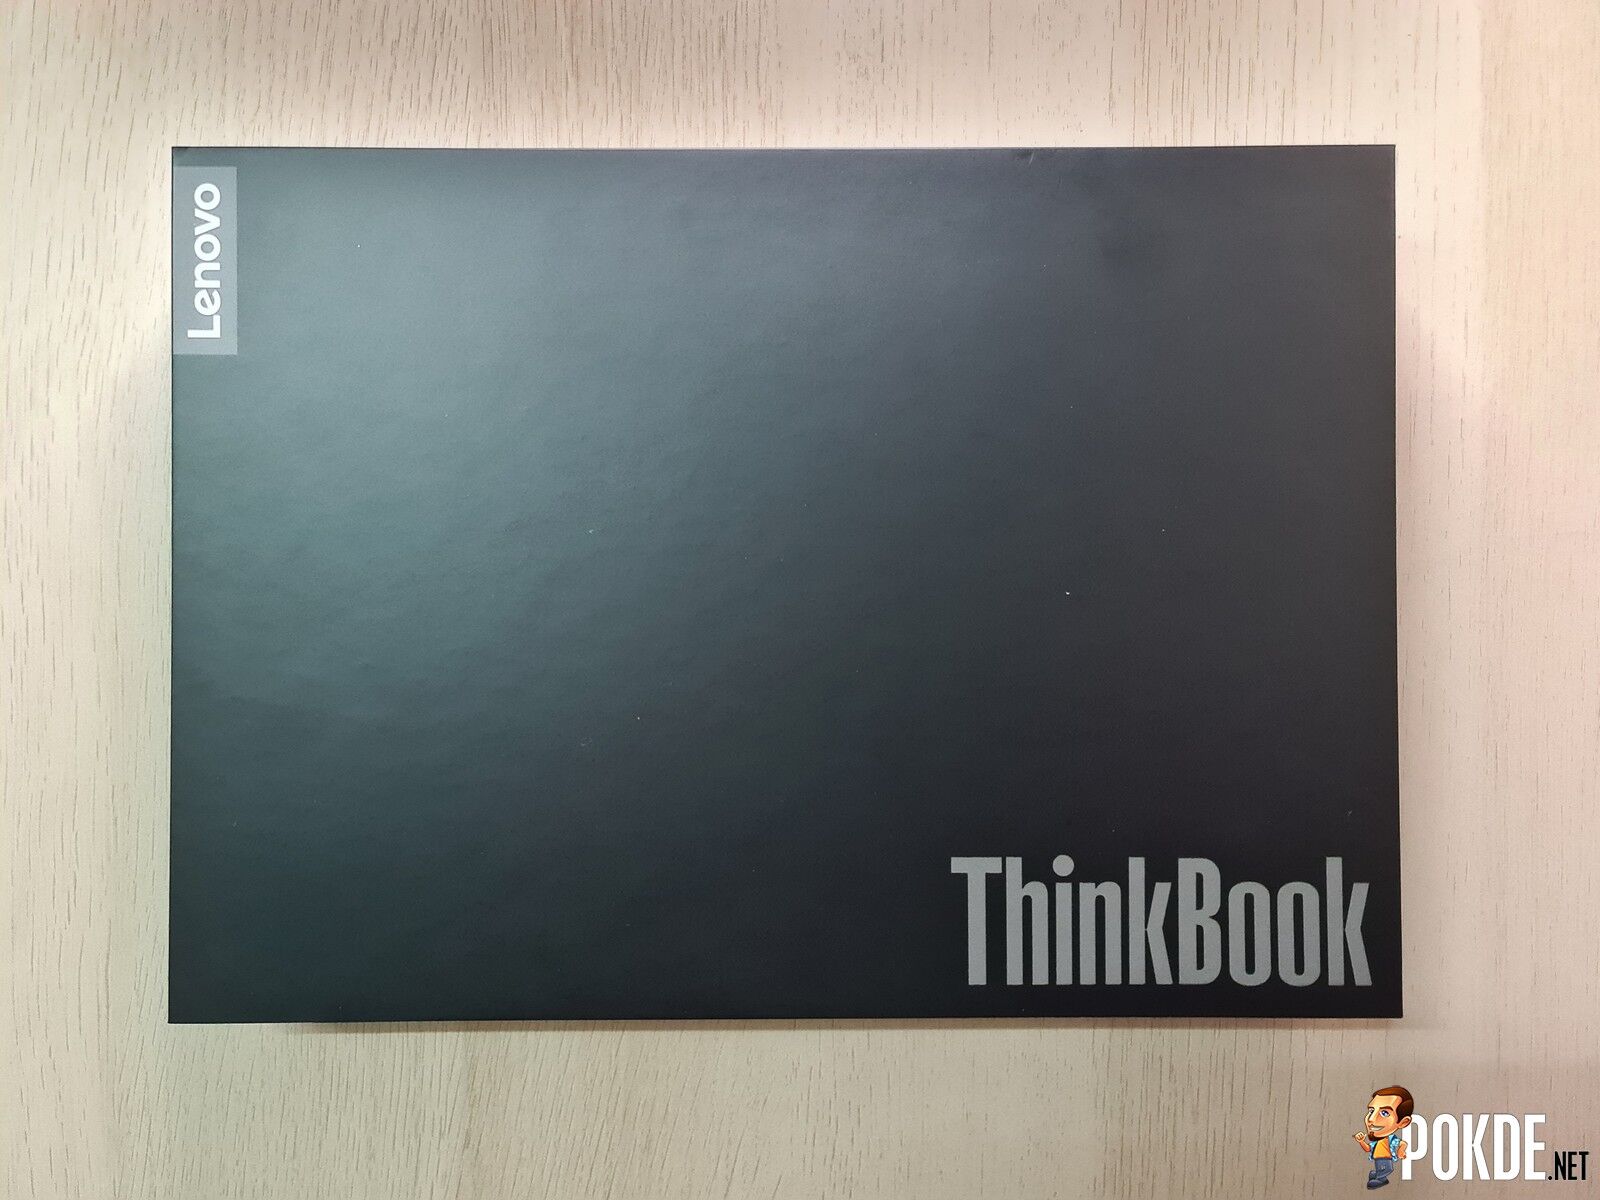 Lenovo ThinkBook Plus Review - Innovation For A Better Tomorrow 30